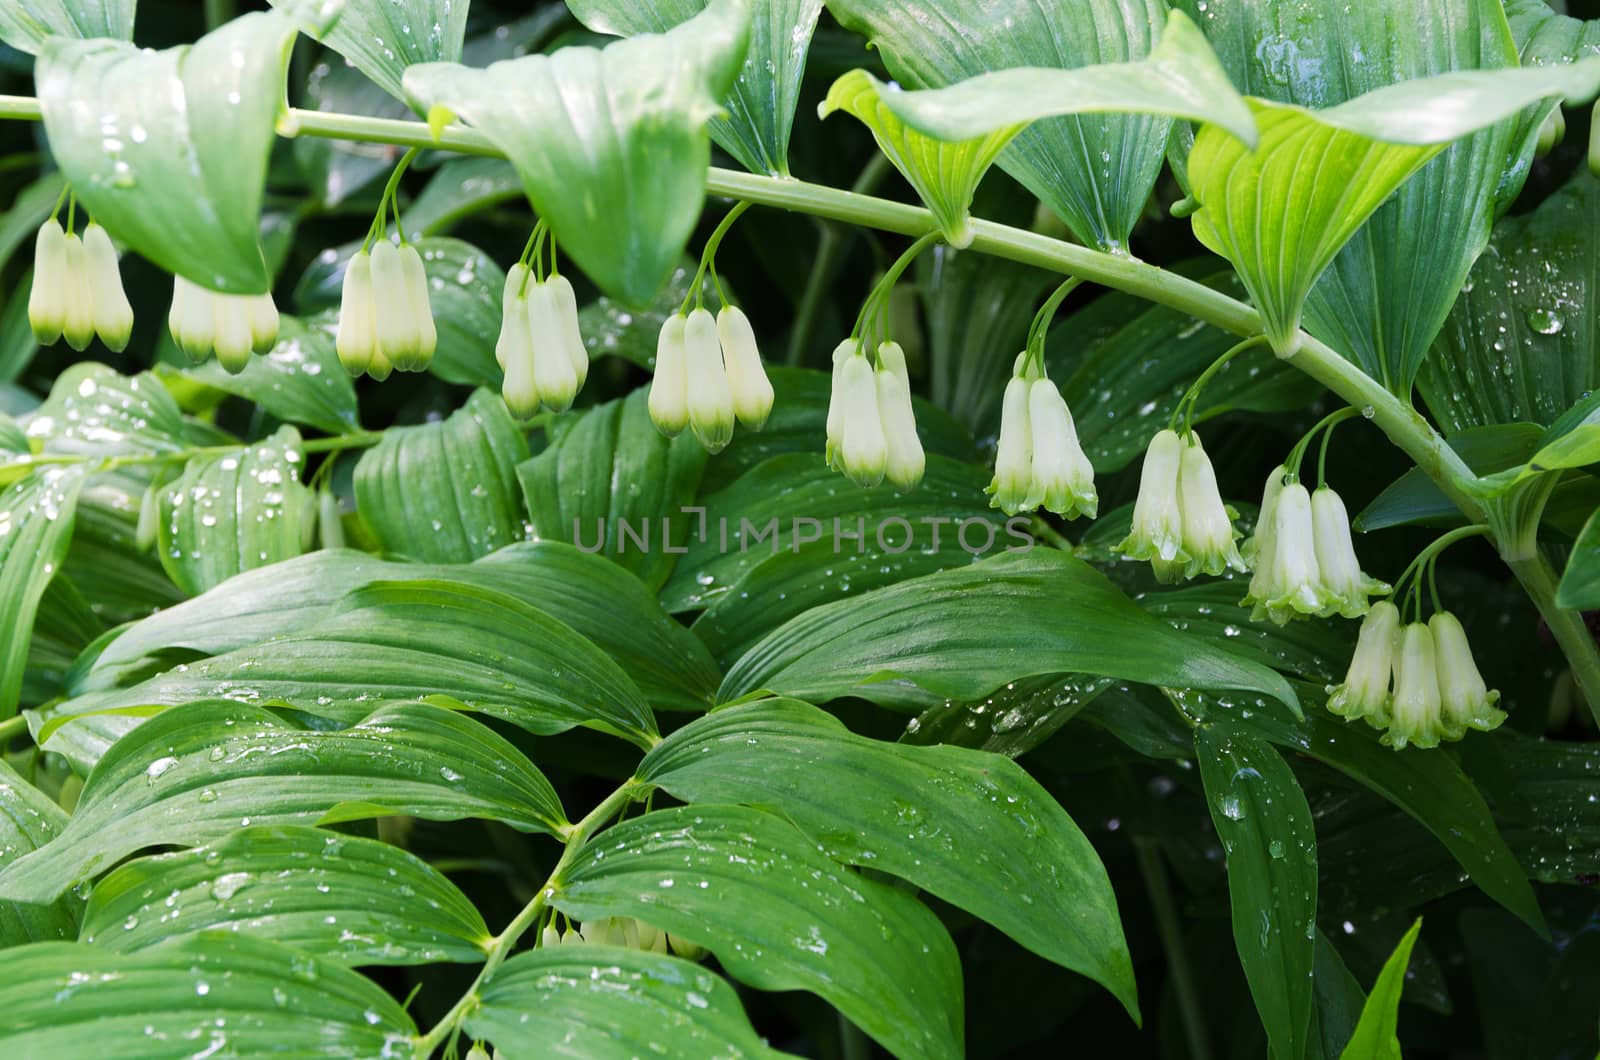 a beutiful white flower from the family Polygonatum with some raindrop